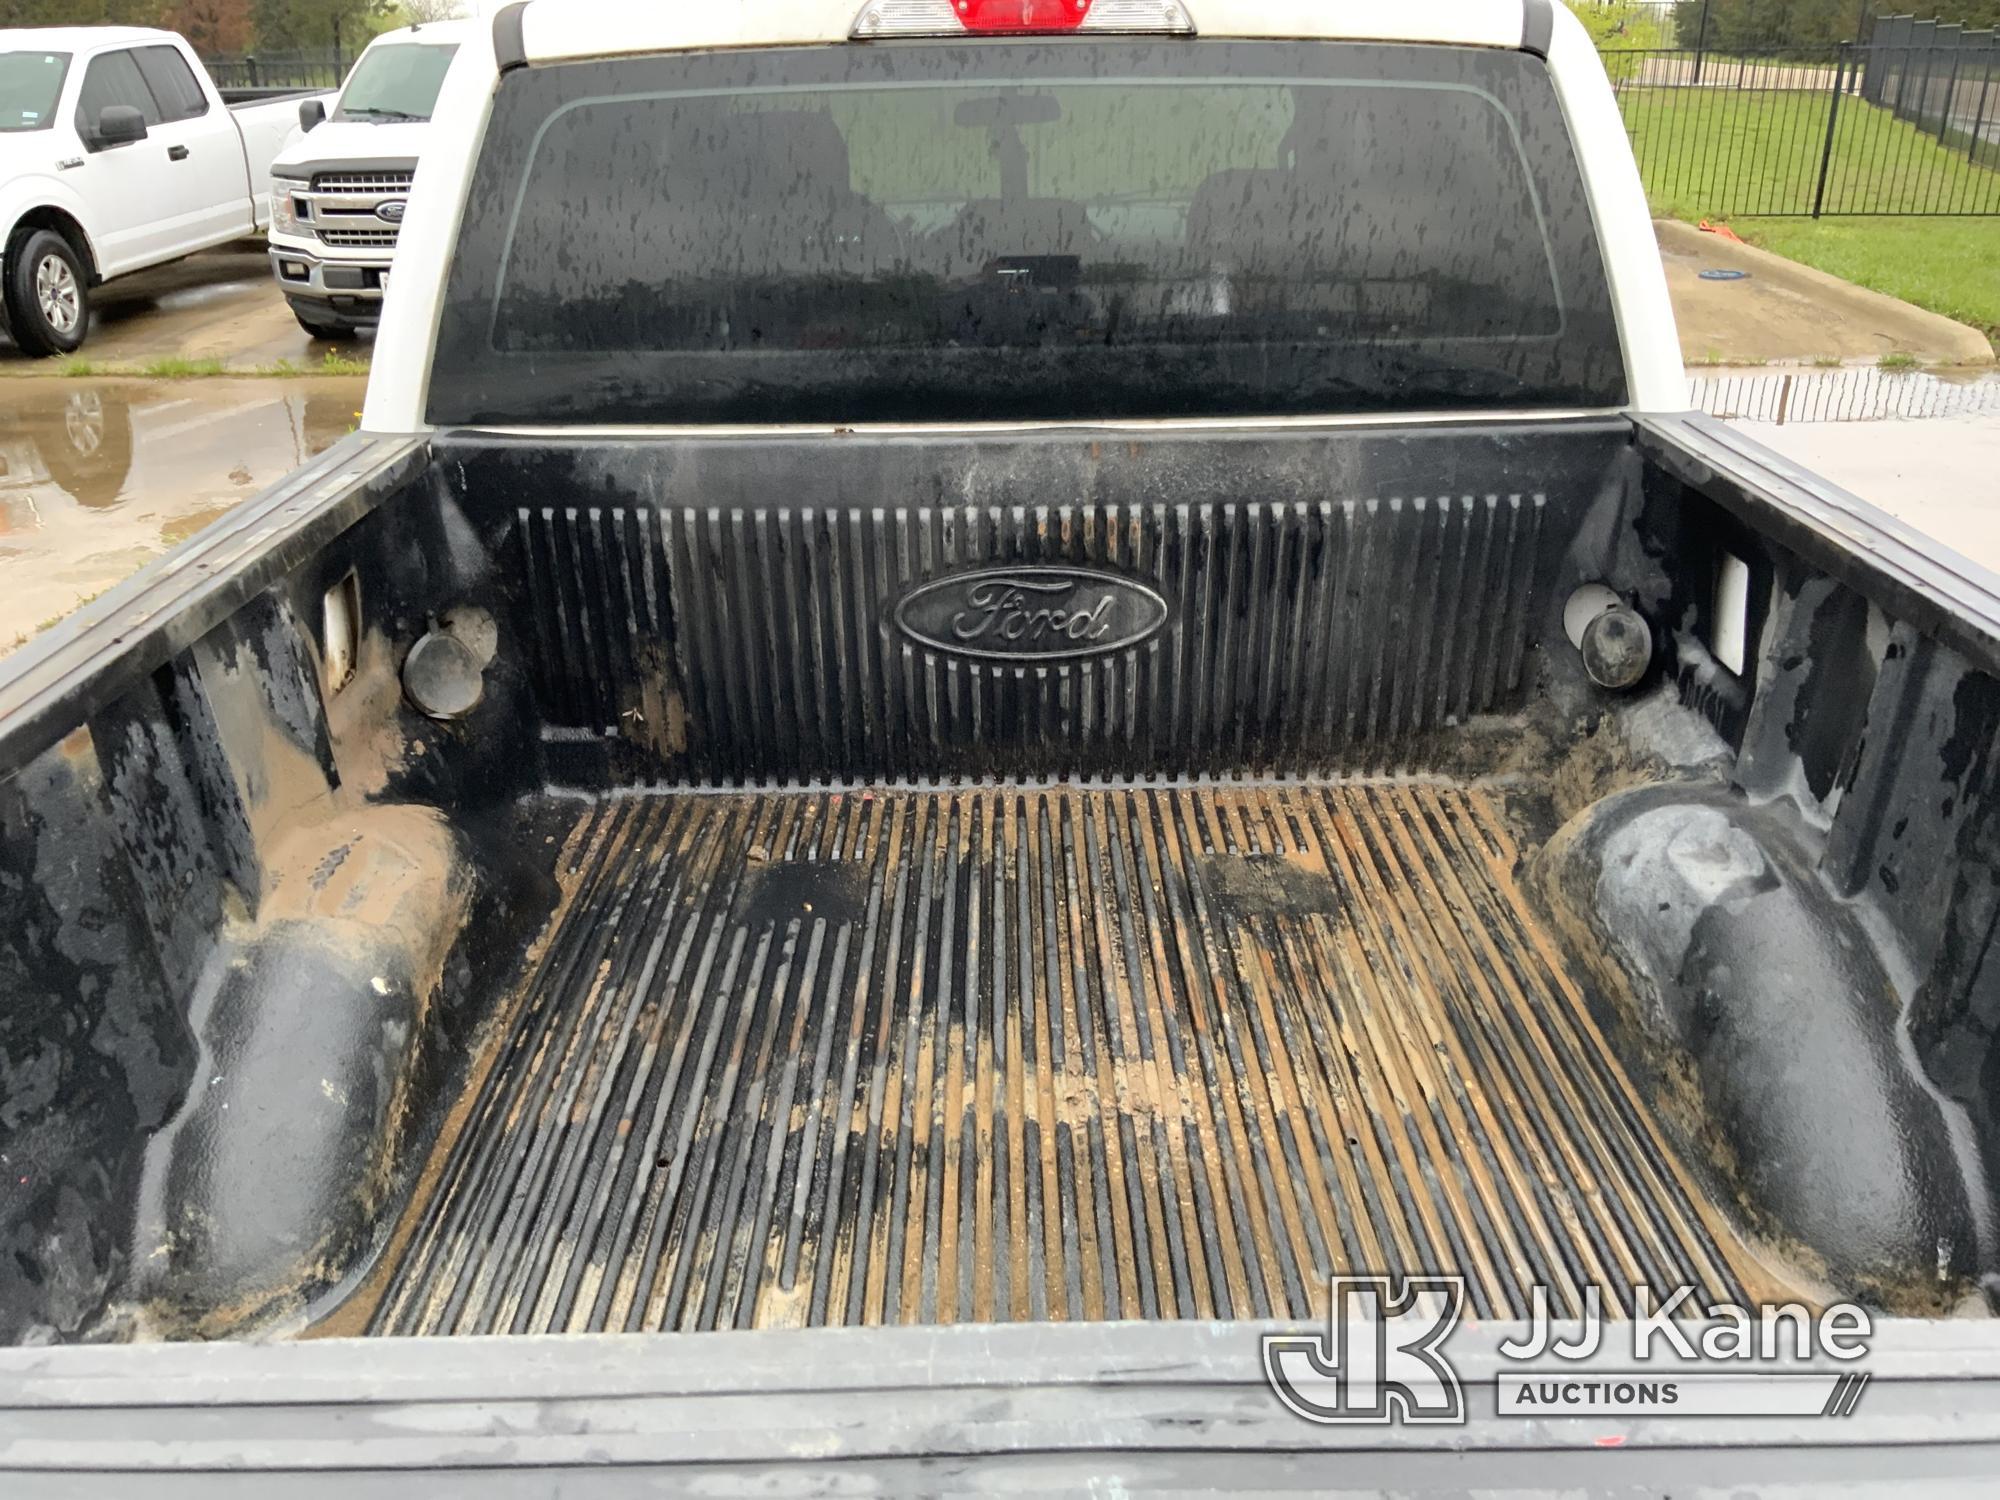 (Midlothian, TX) 2019 Ford F150 Crew-Cab Pickup Truck Runs. Moves. Cracked windshield. Body damage